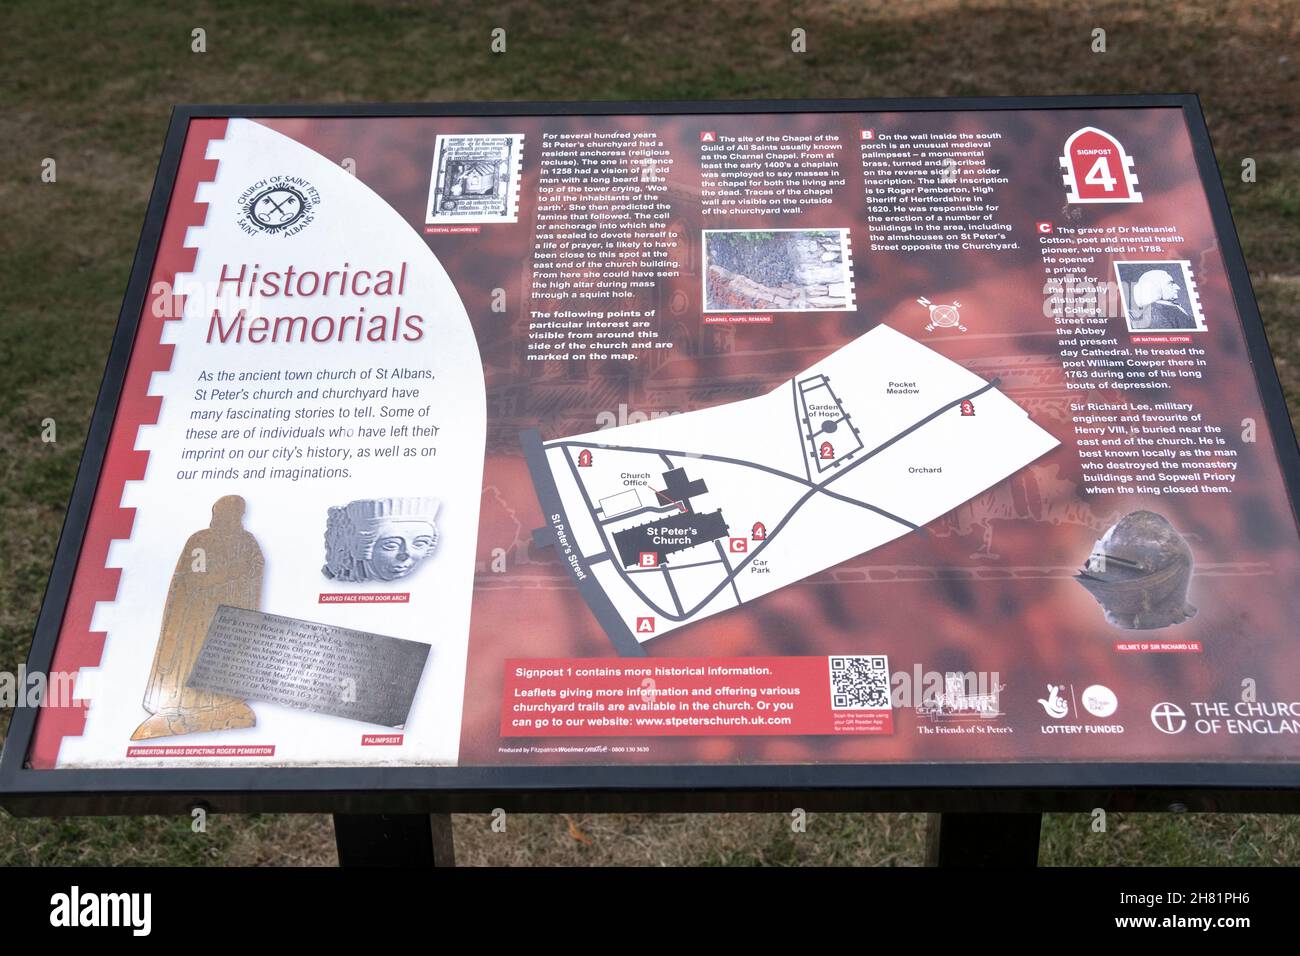 Tourist information board in the grounds of St Peter's Church detailing parts of it's history, St Albans, Hertfordshire, UK. Stock Photo